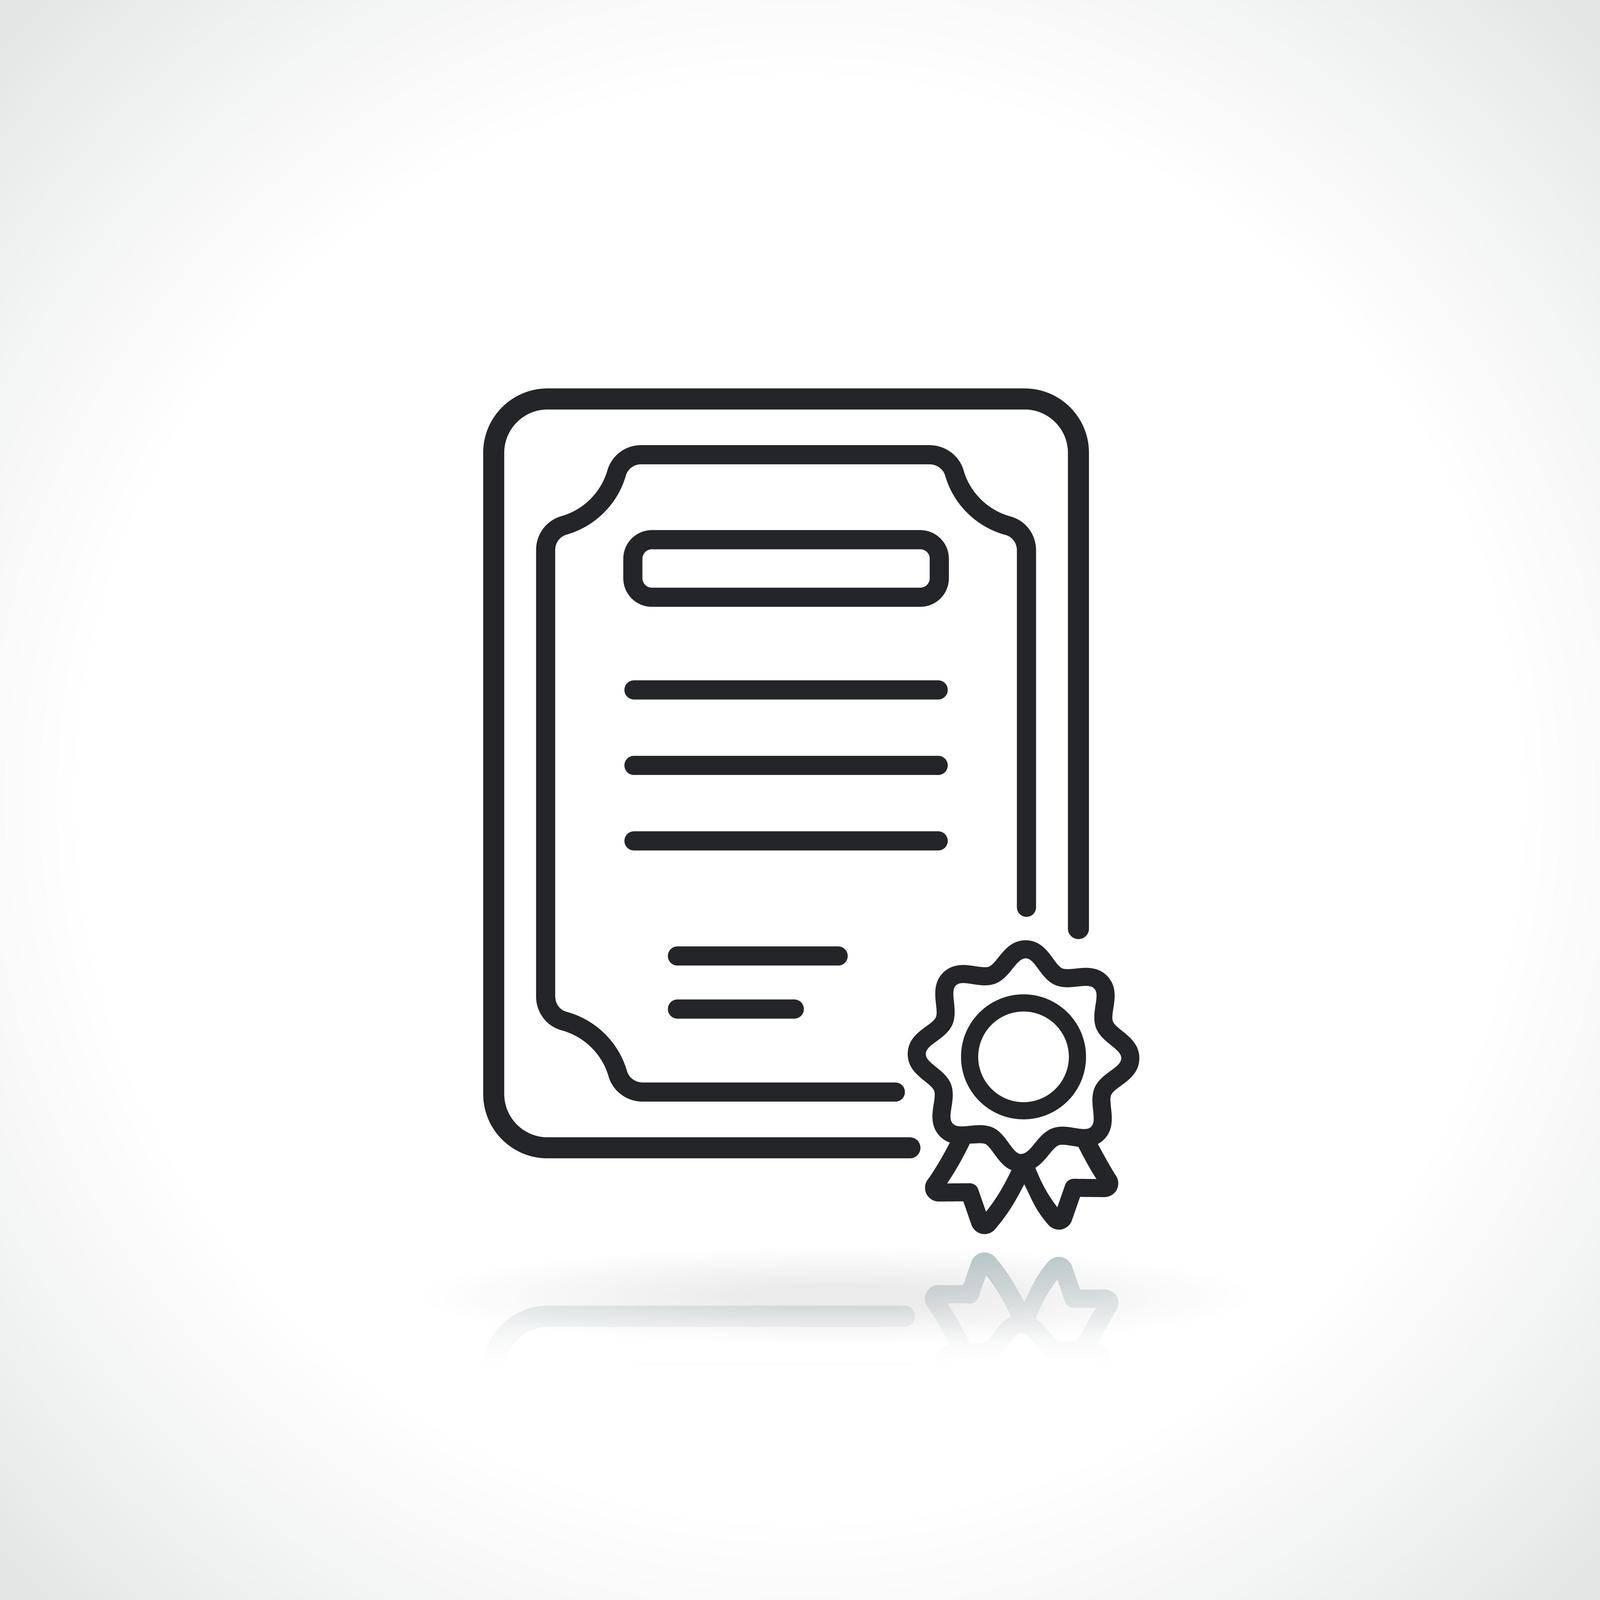 certificate or diploma line icon by Francois_Poirier